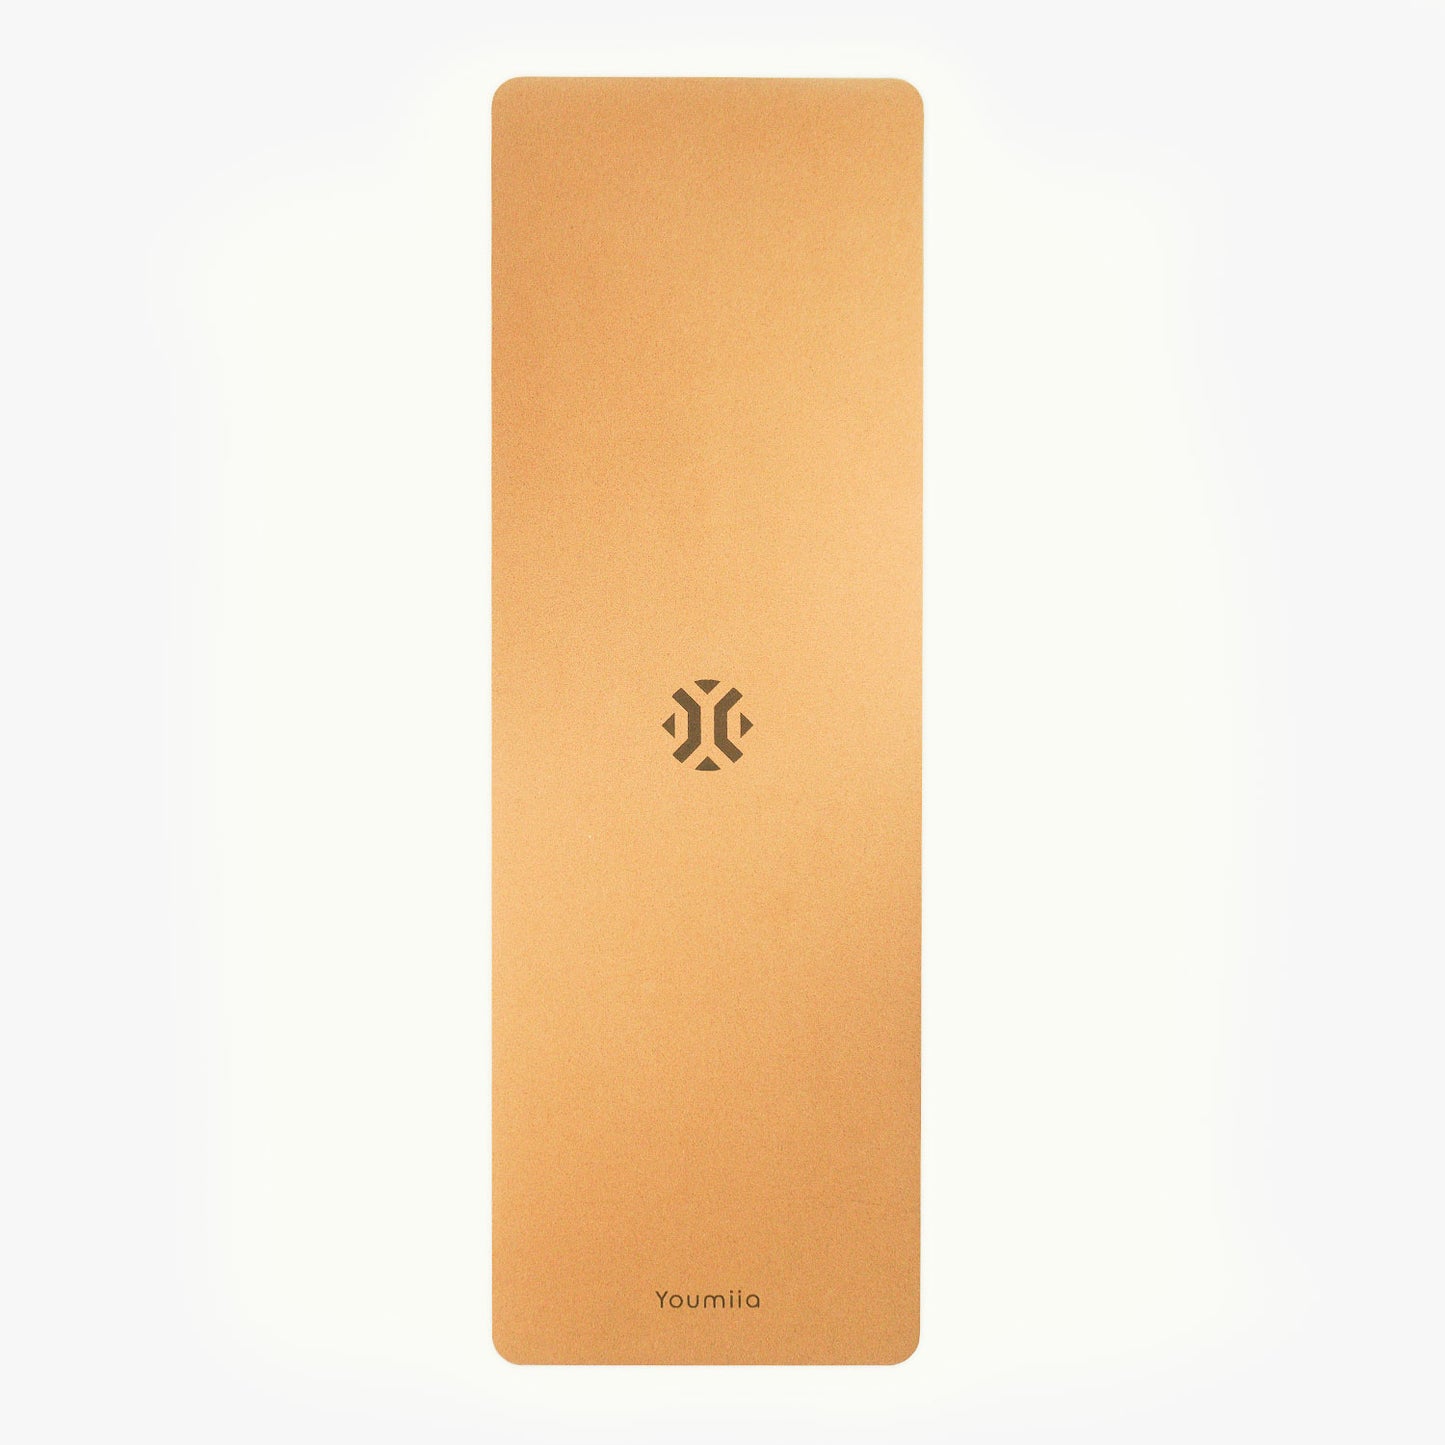 Yoga Mat is made with natural rubber and natural cork wood.